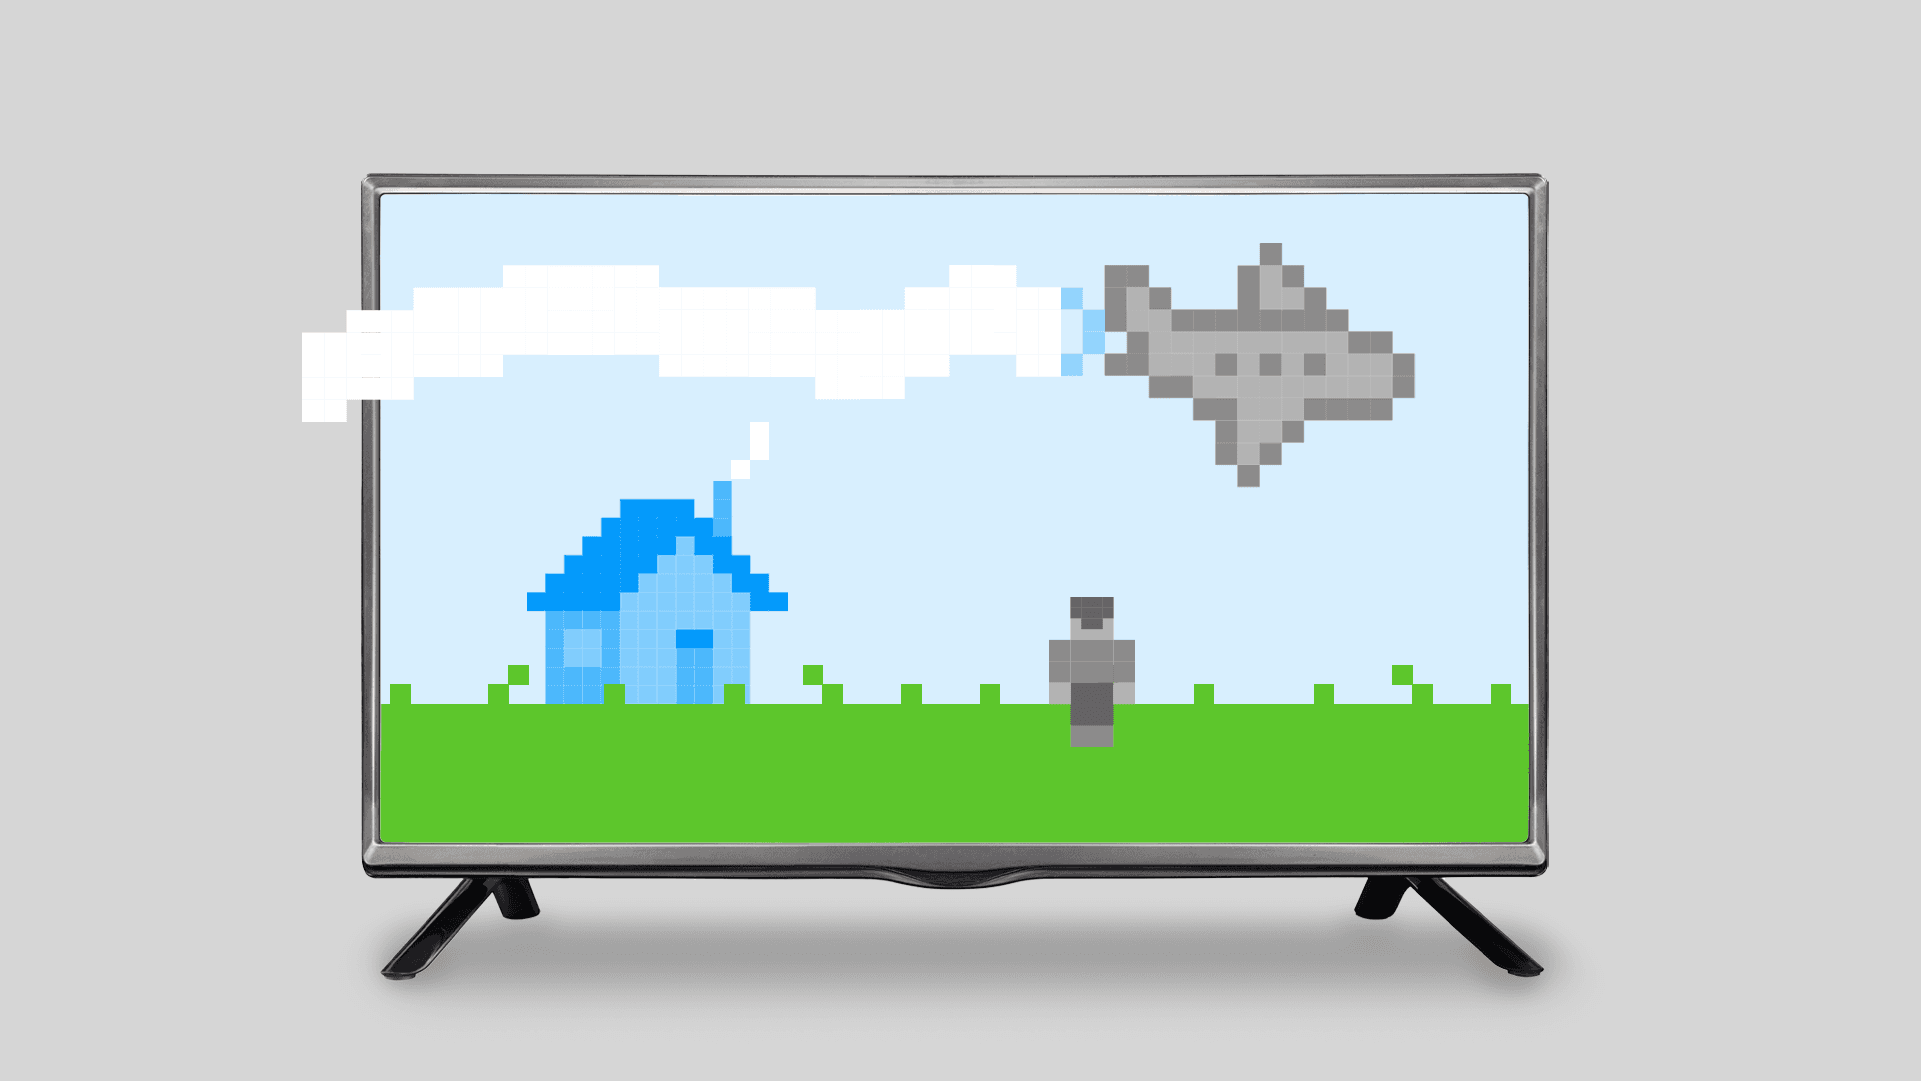 A TV screen displays a brightly colored pixelated animation of a tiny house and game character while a plane flies overhead.